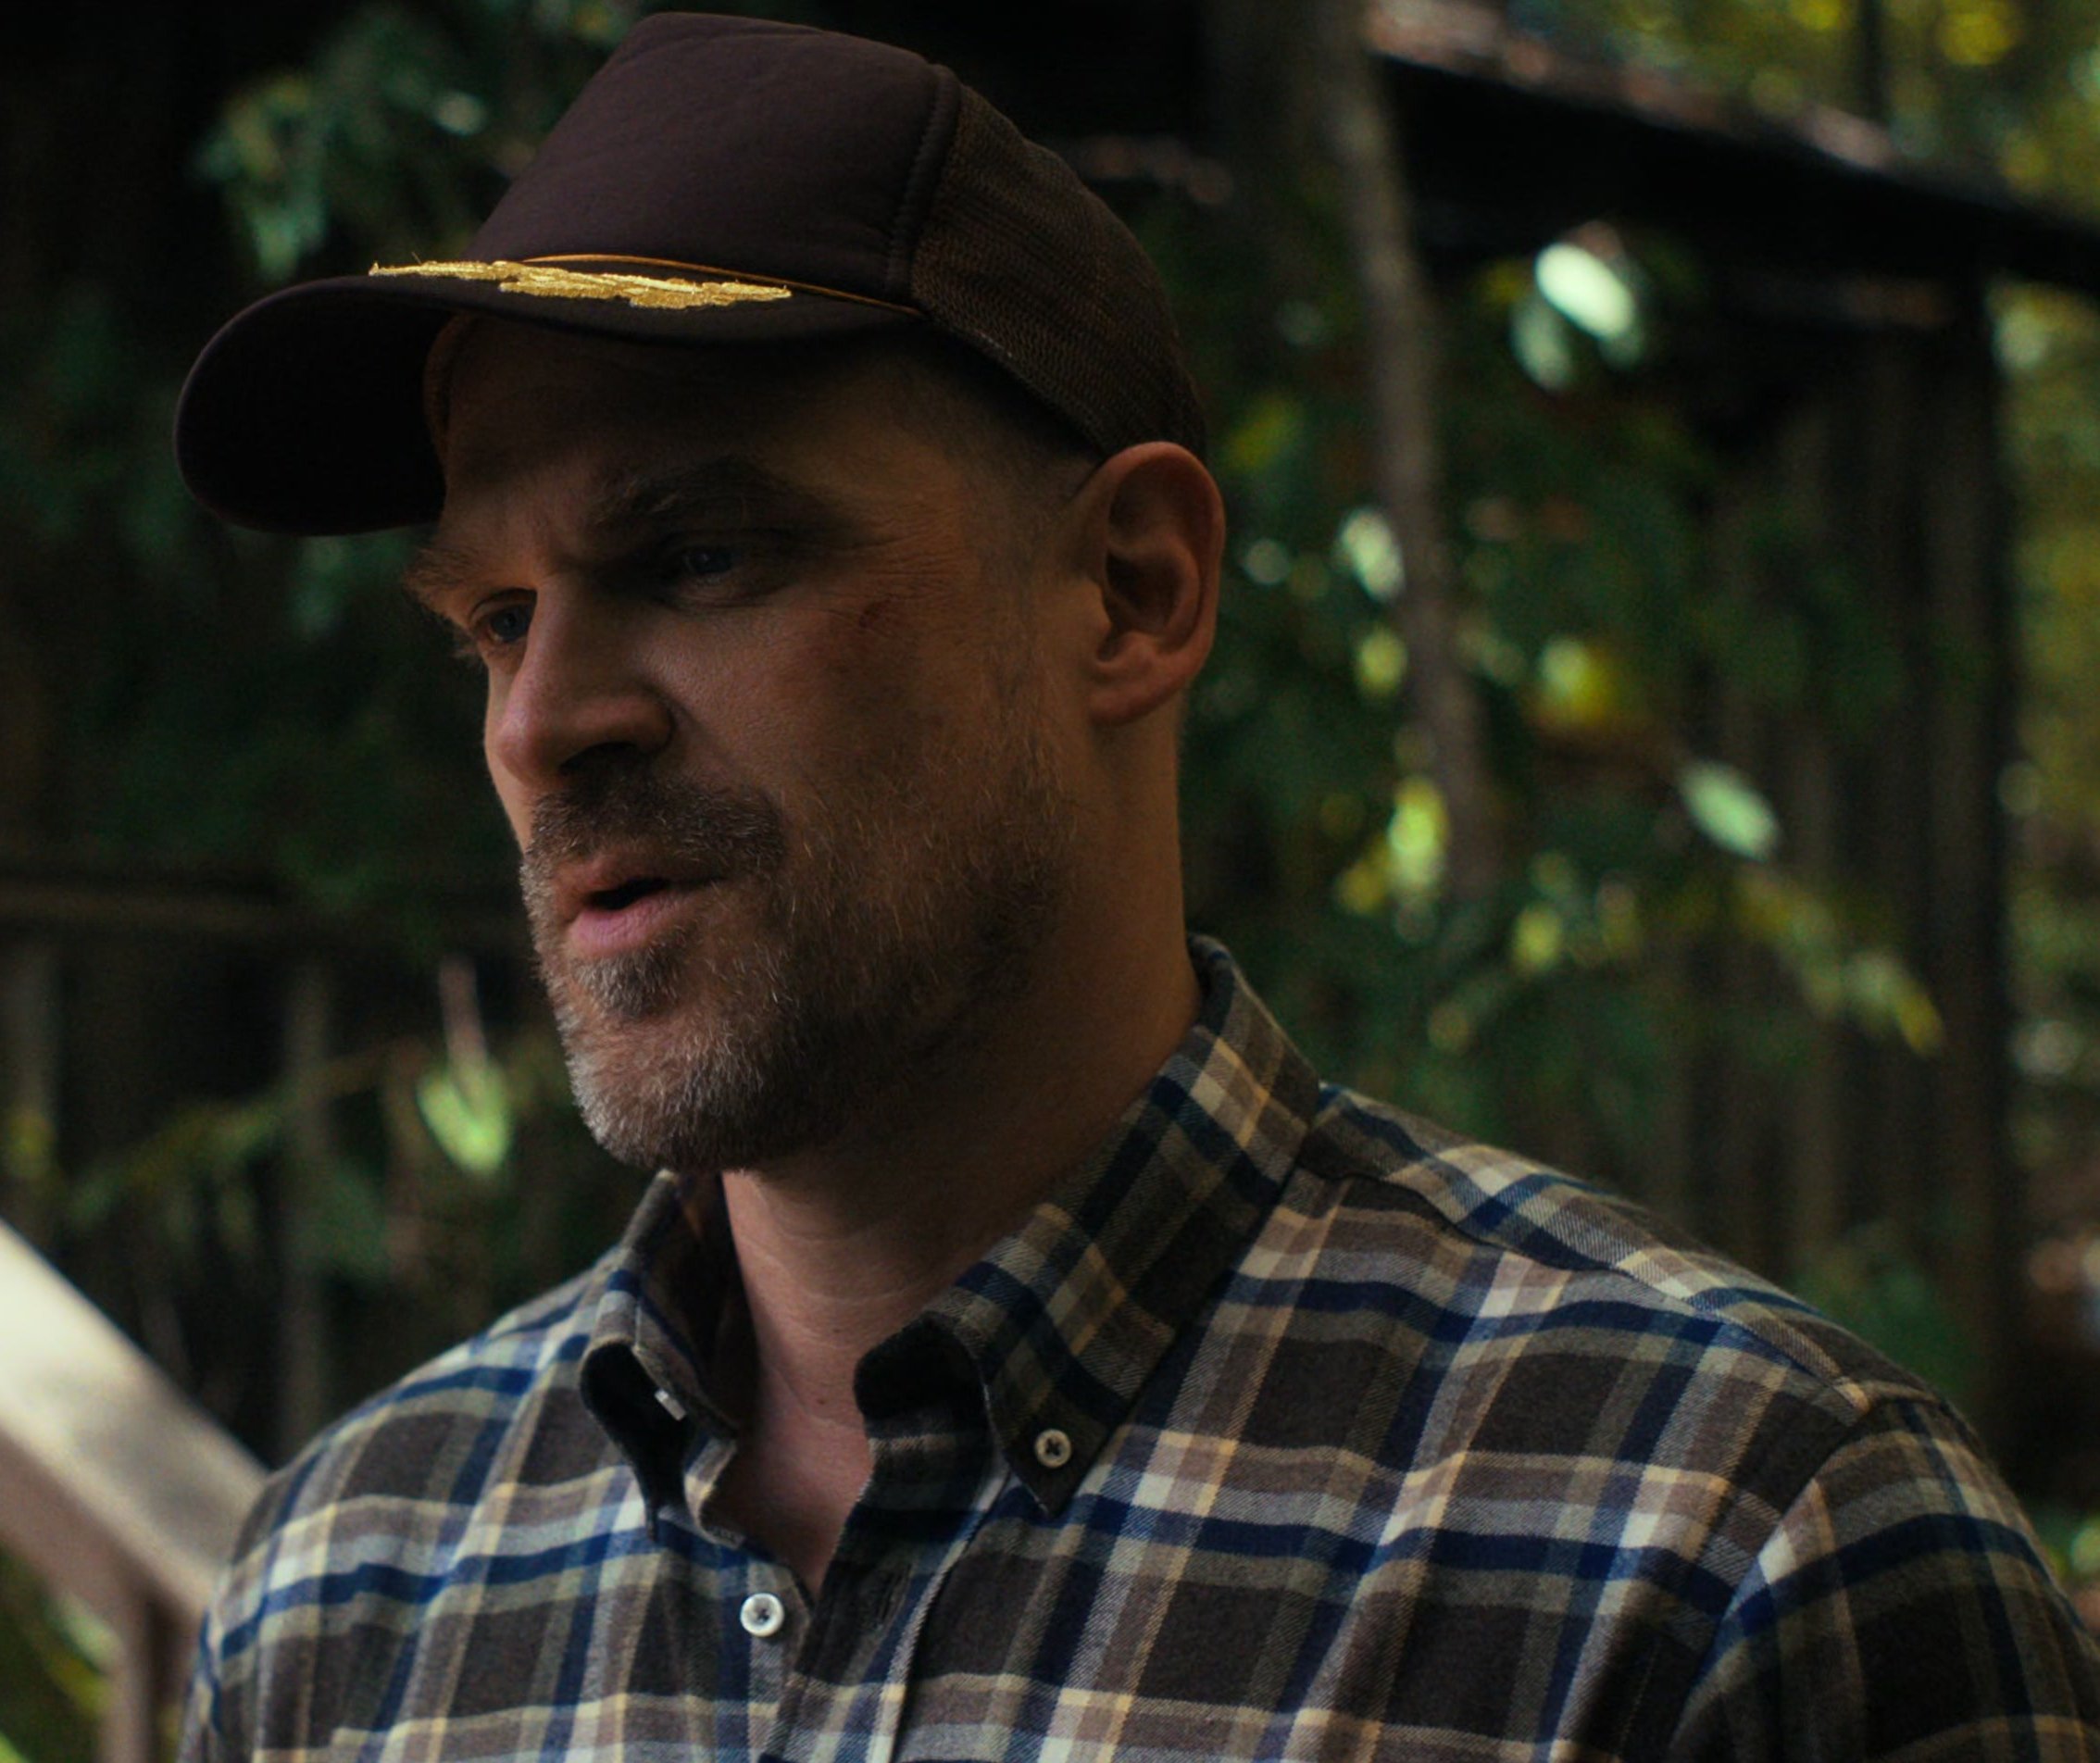 Worn on Stranger Things TV Show - Cap with a Gold Leaf Insignia on the Brim of David Harbour as Jim Hopper